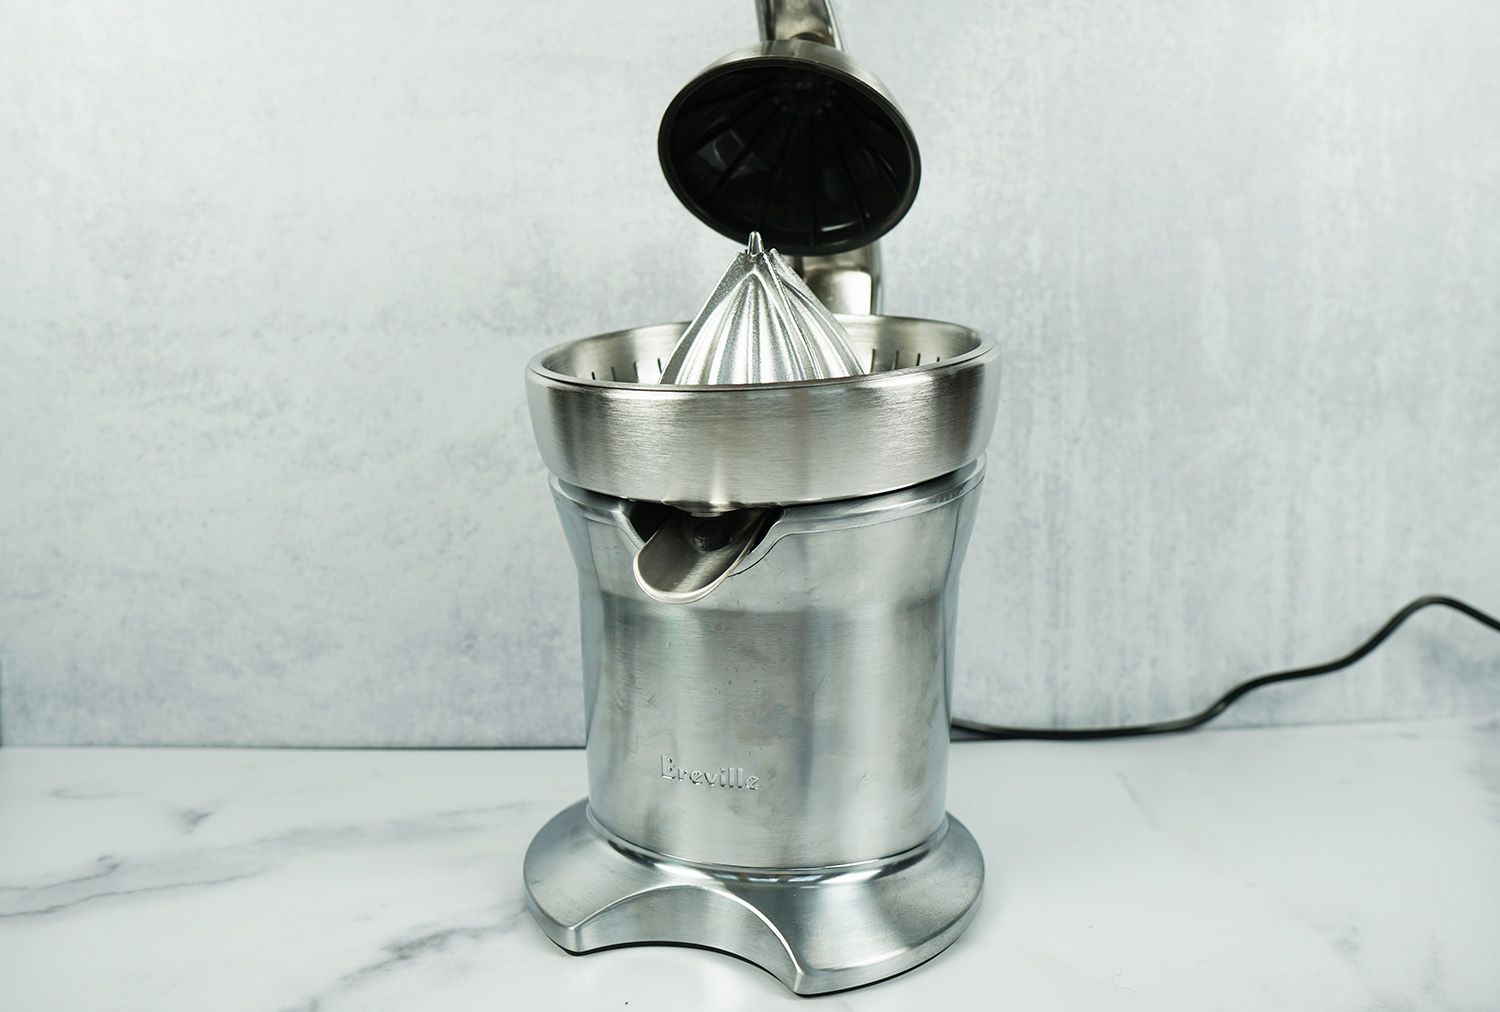 a stainless steel Breville electric citrus juicer on a marble surface